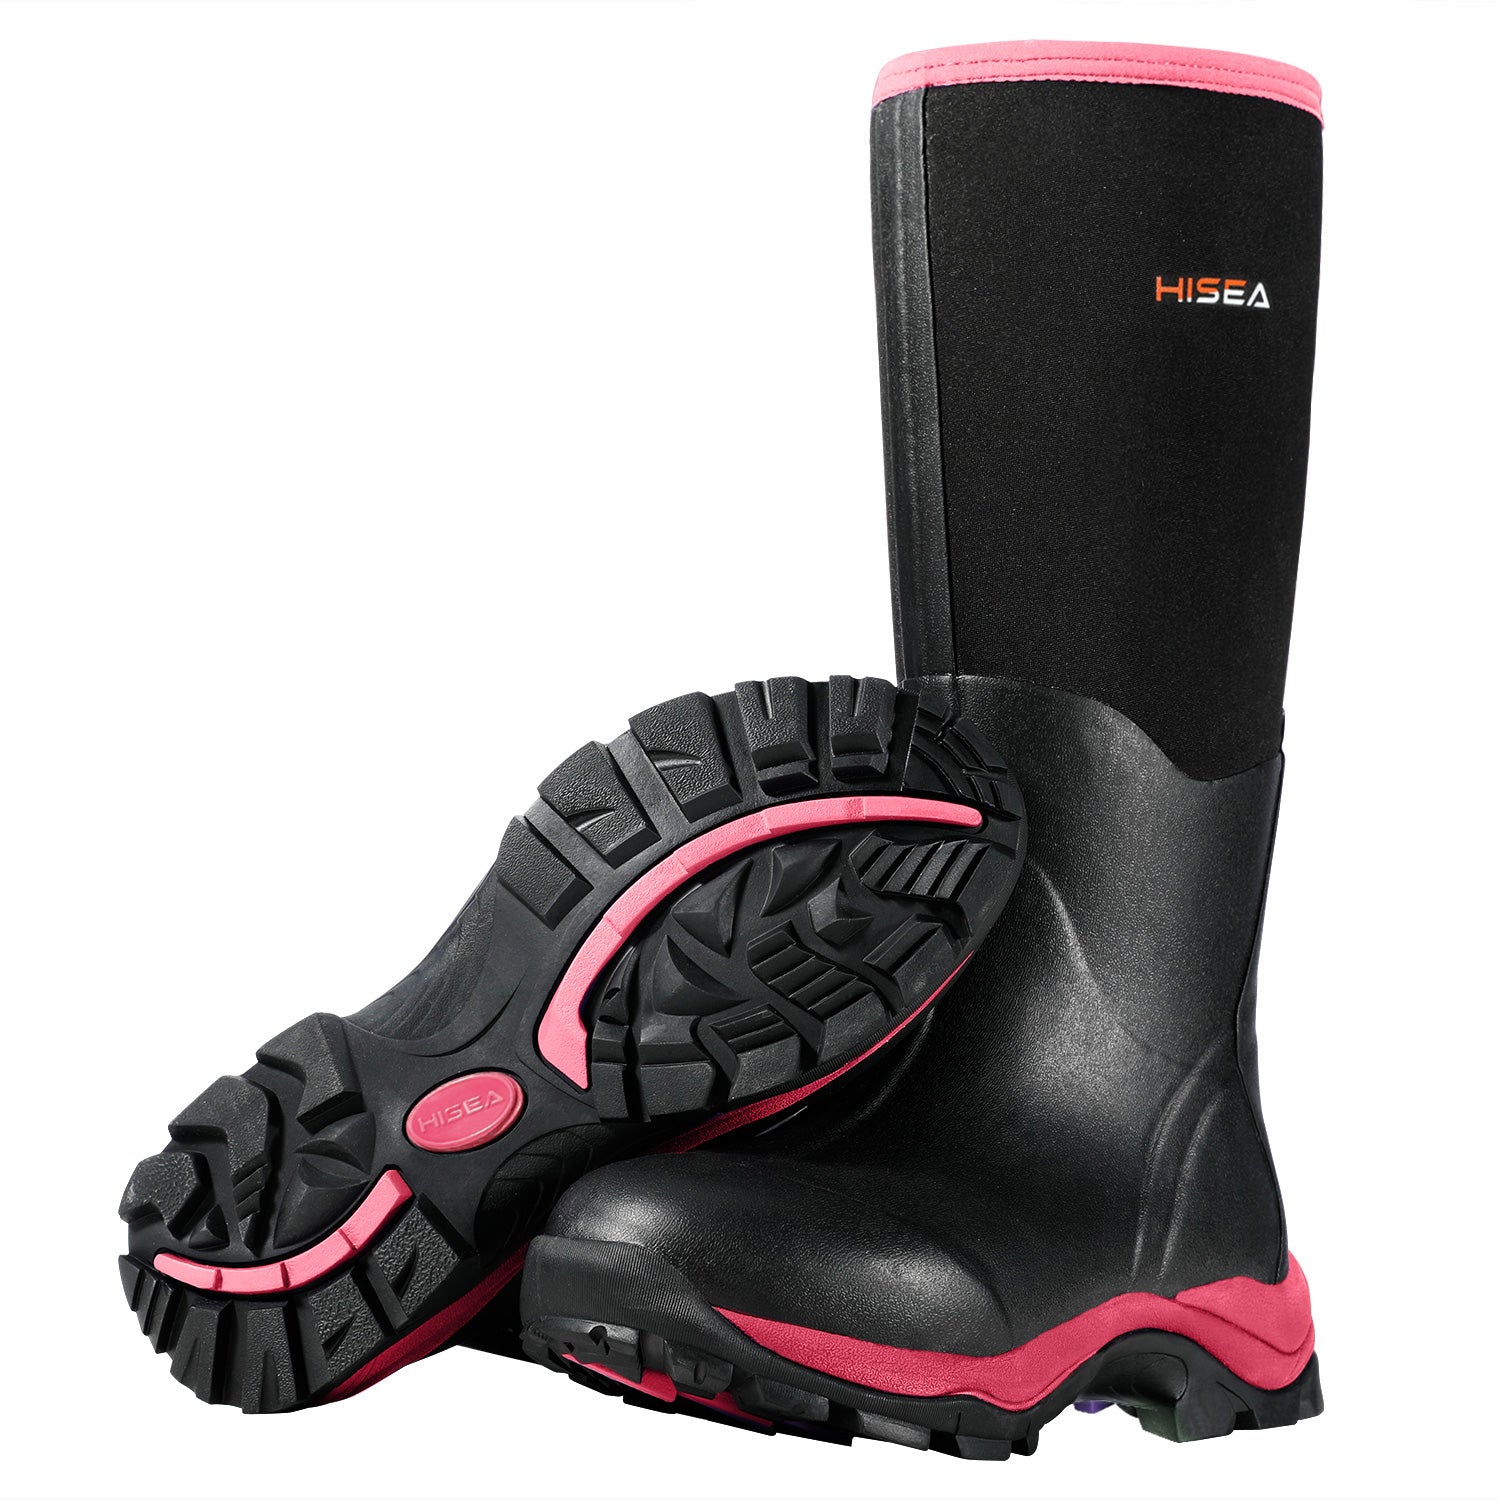 female hunting boots